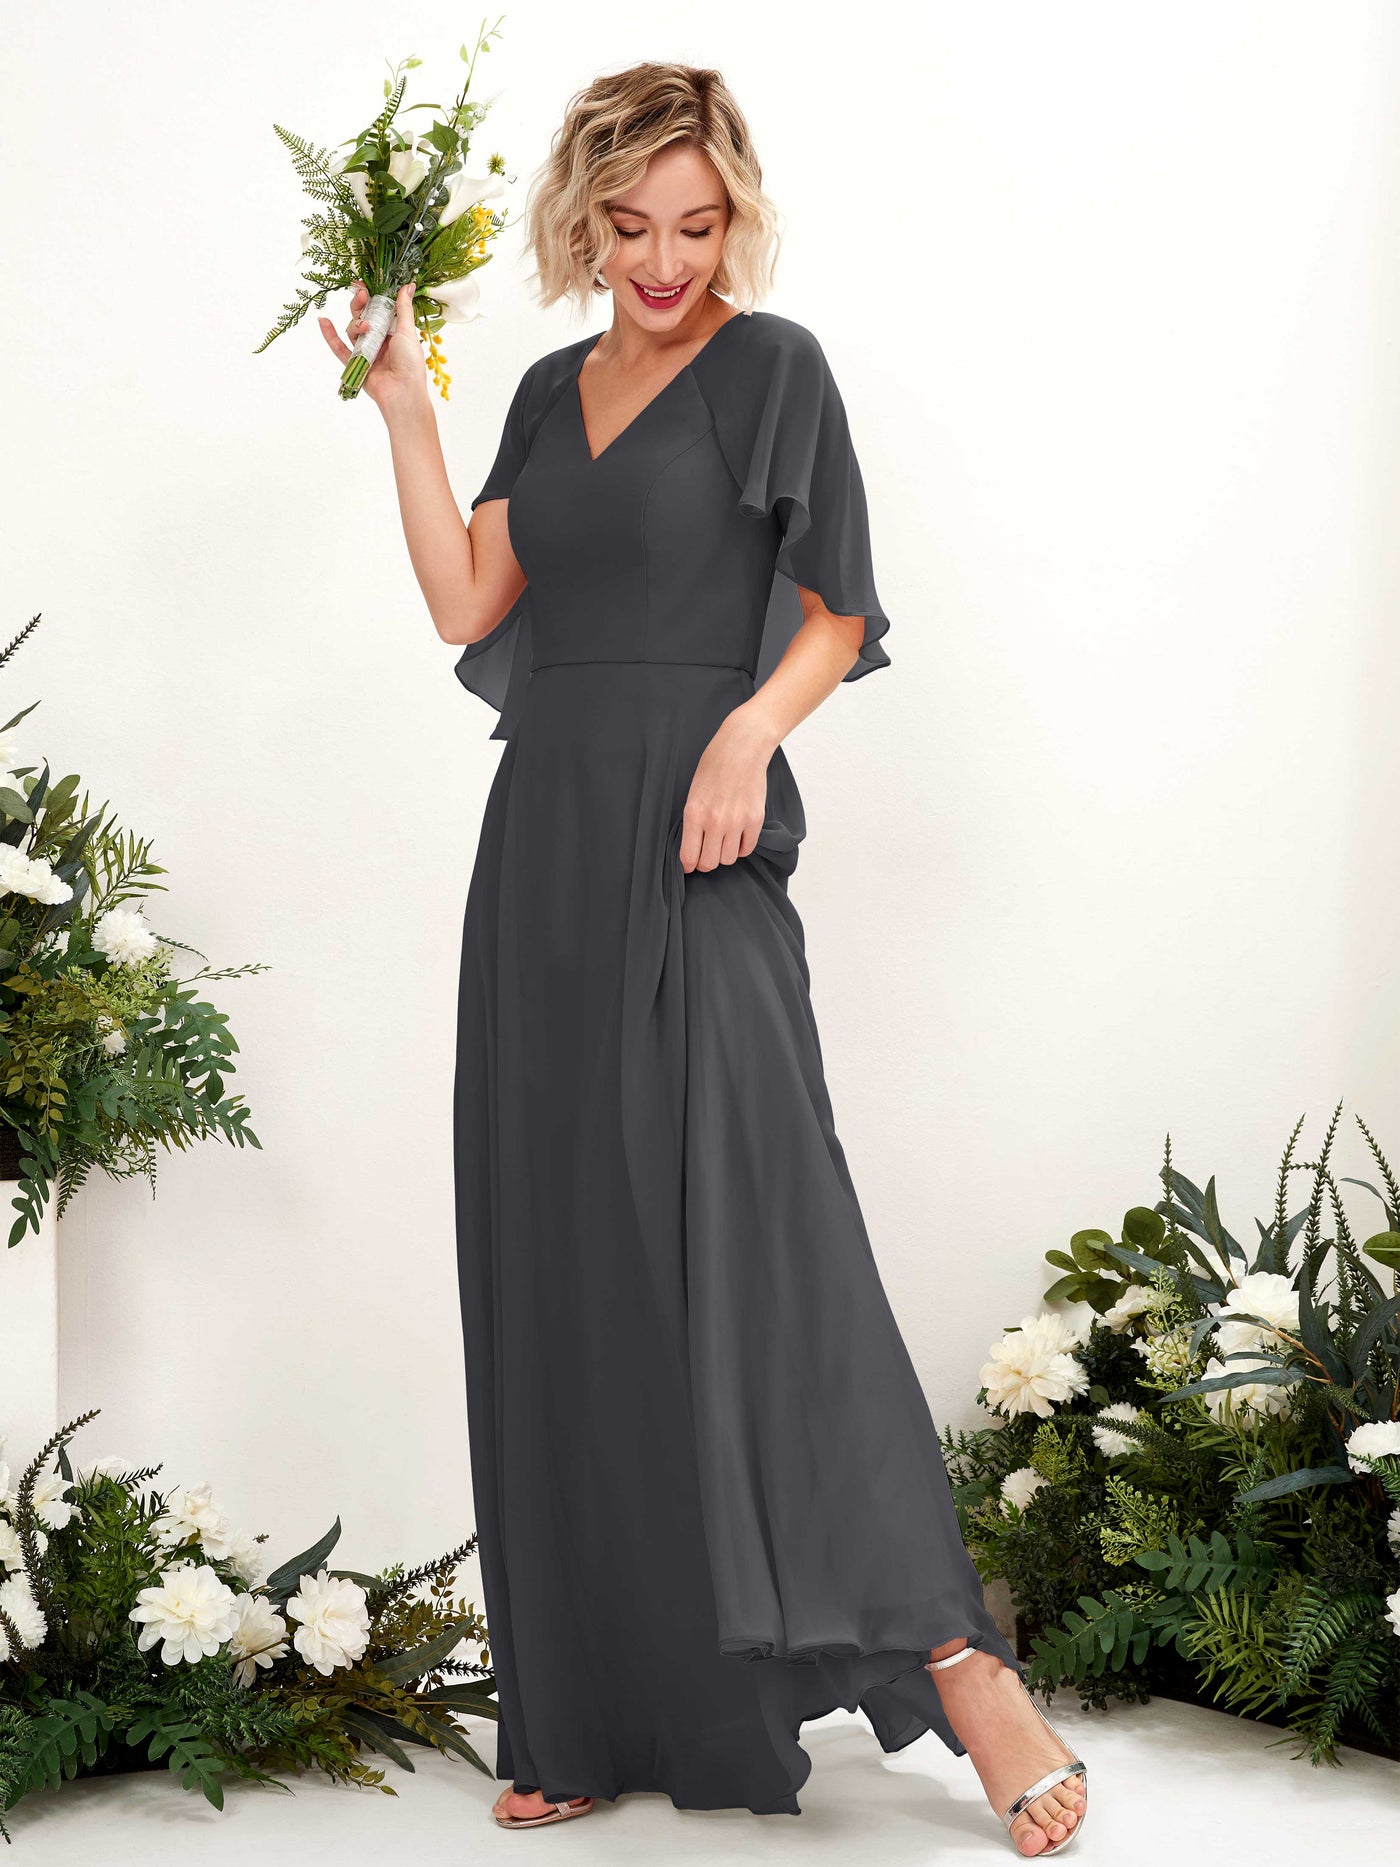 Pewter Bridesmaid Dresses Bridesmaid Dress A-line Chiffon V-neck Full Length Short Sleeves Wedding Party Dress (81224438)#color_pewter